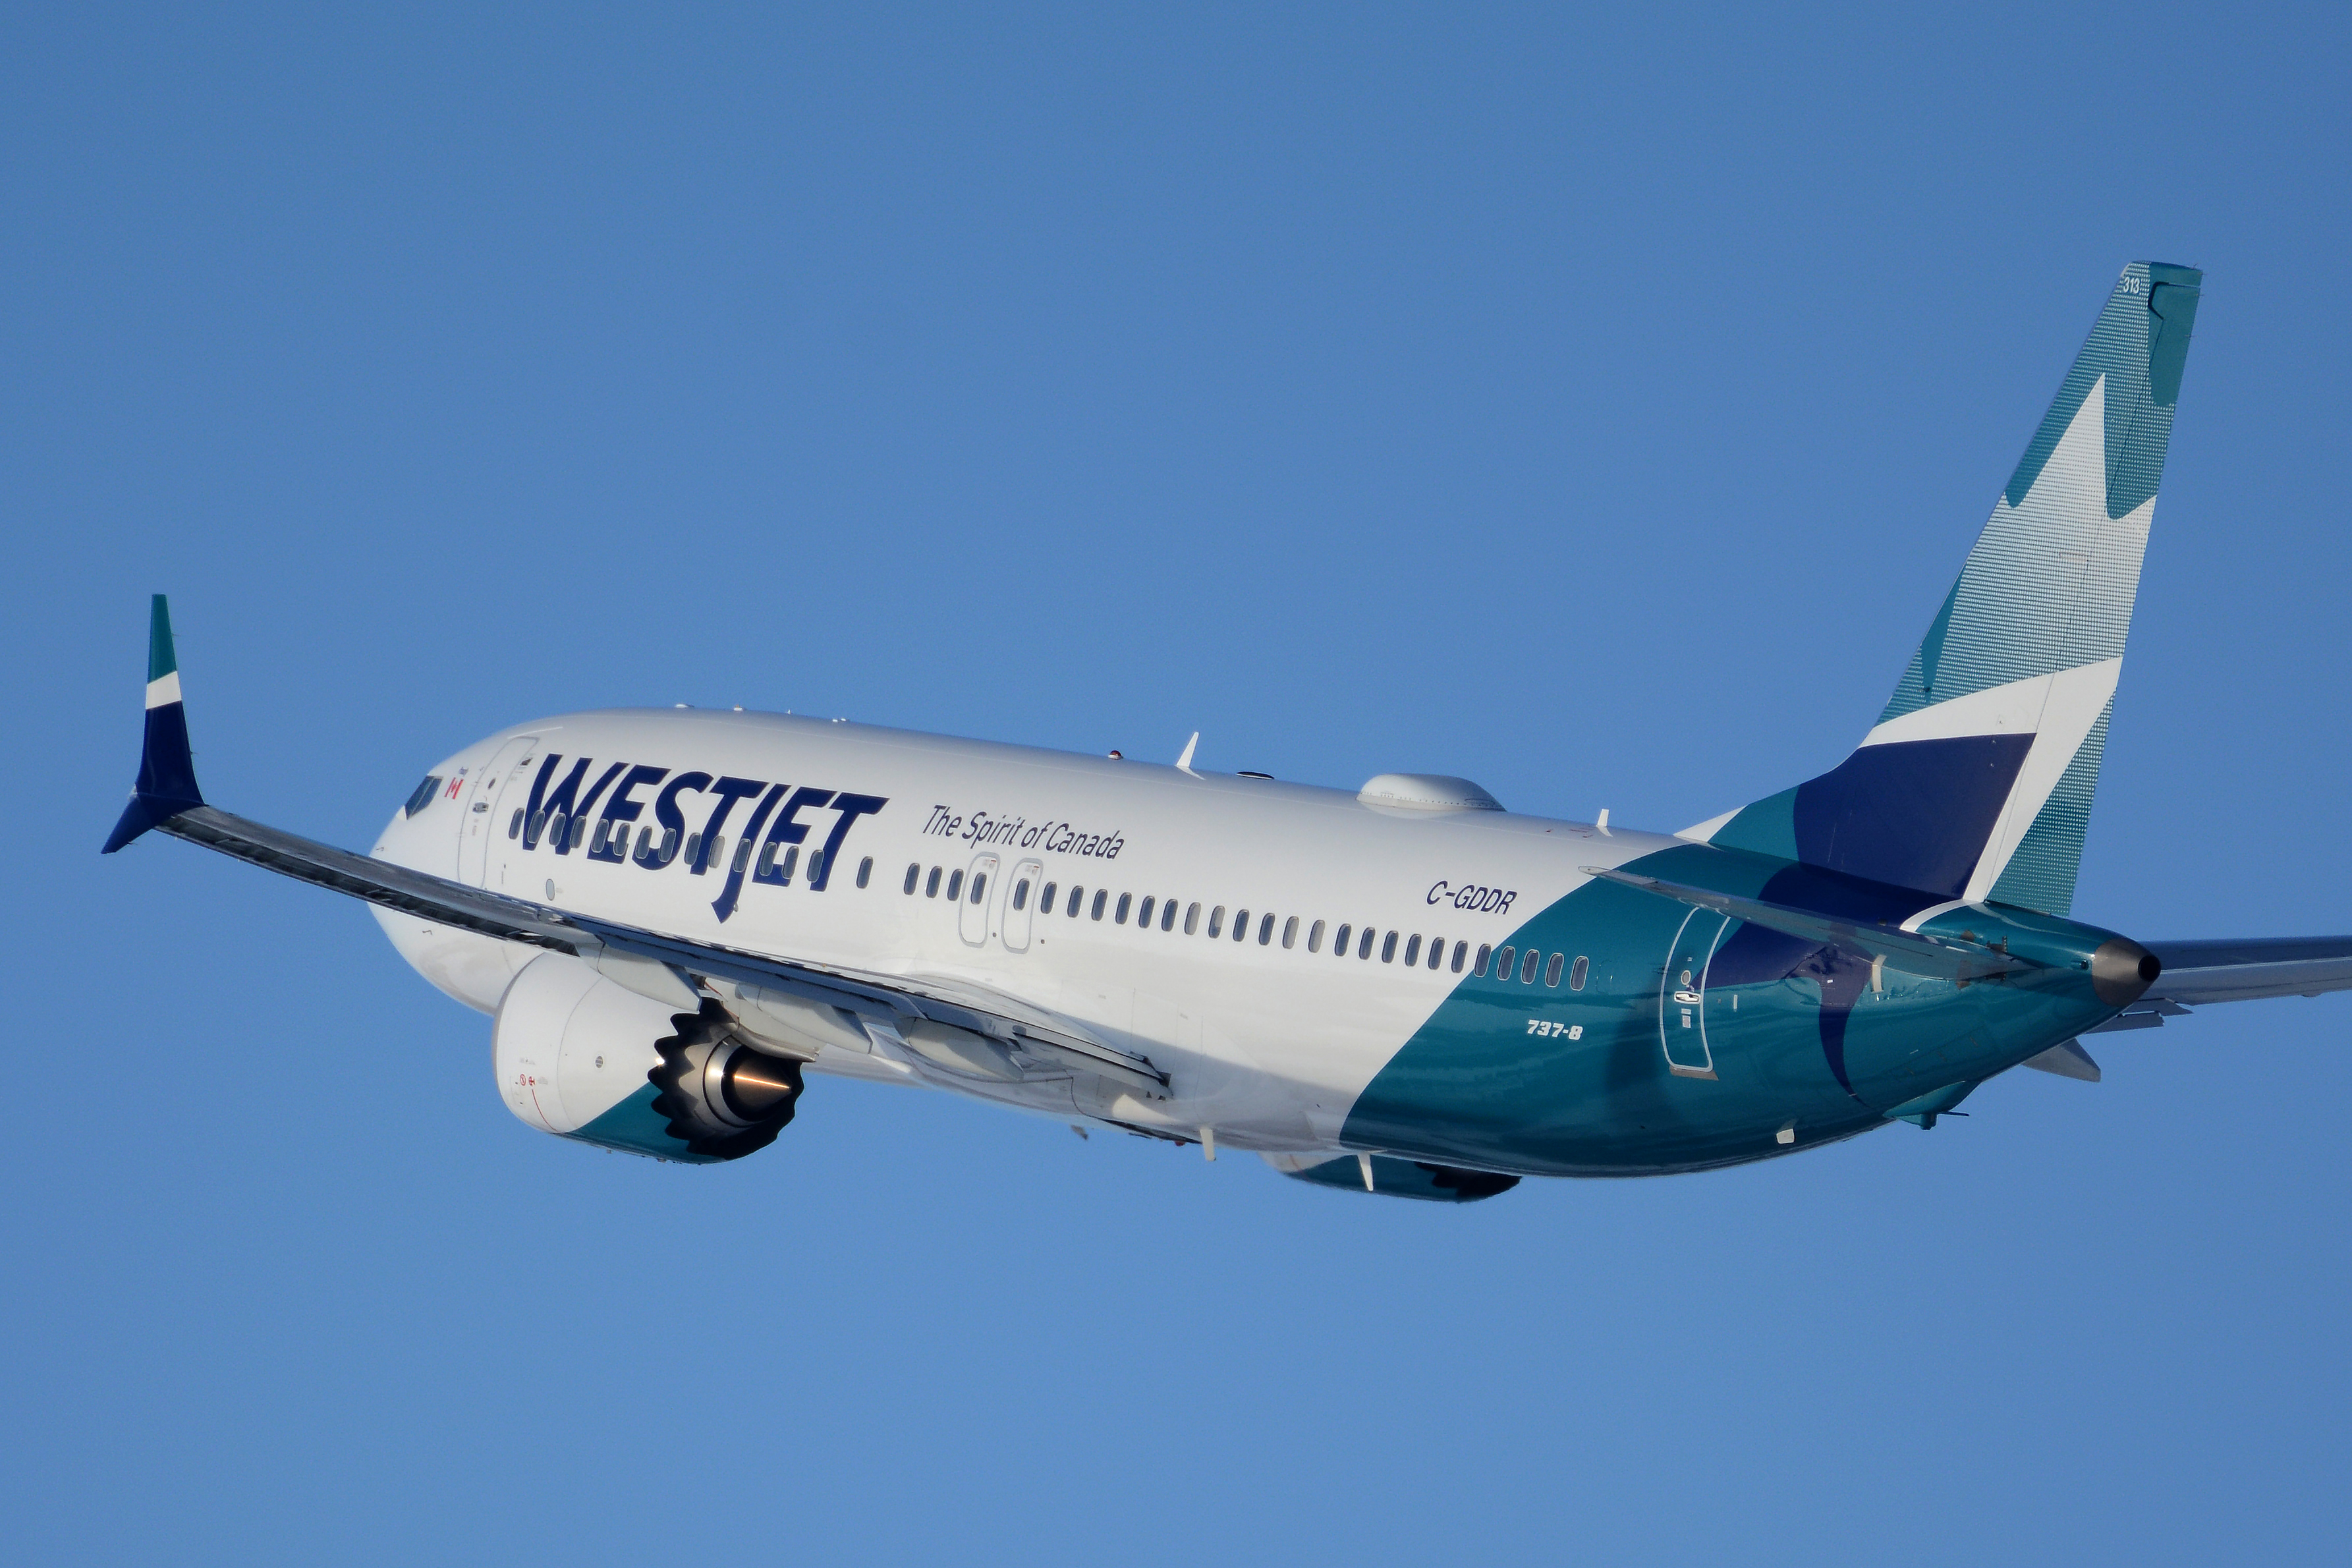 WestJet, Canada's second-largest airline, will be taken private